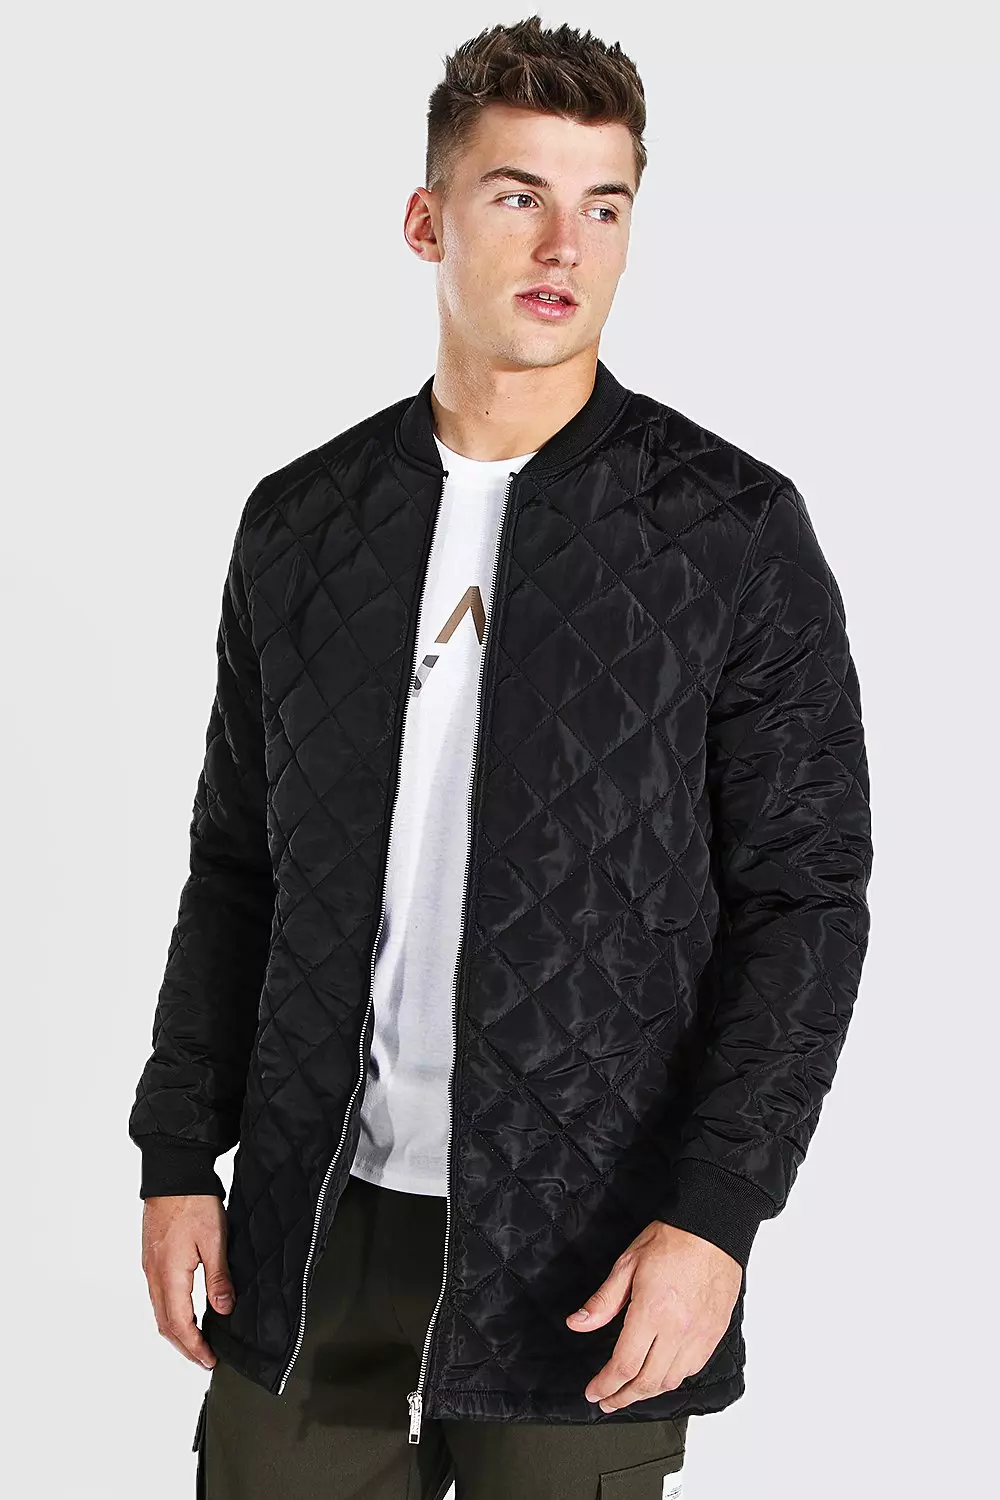 Longline Quilted Bomber Black